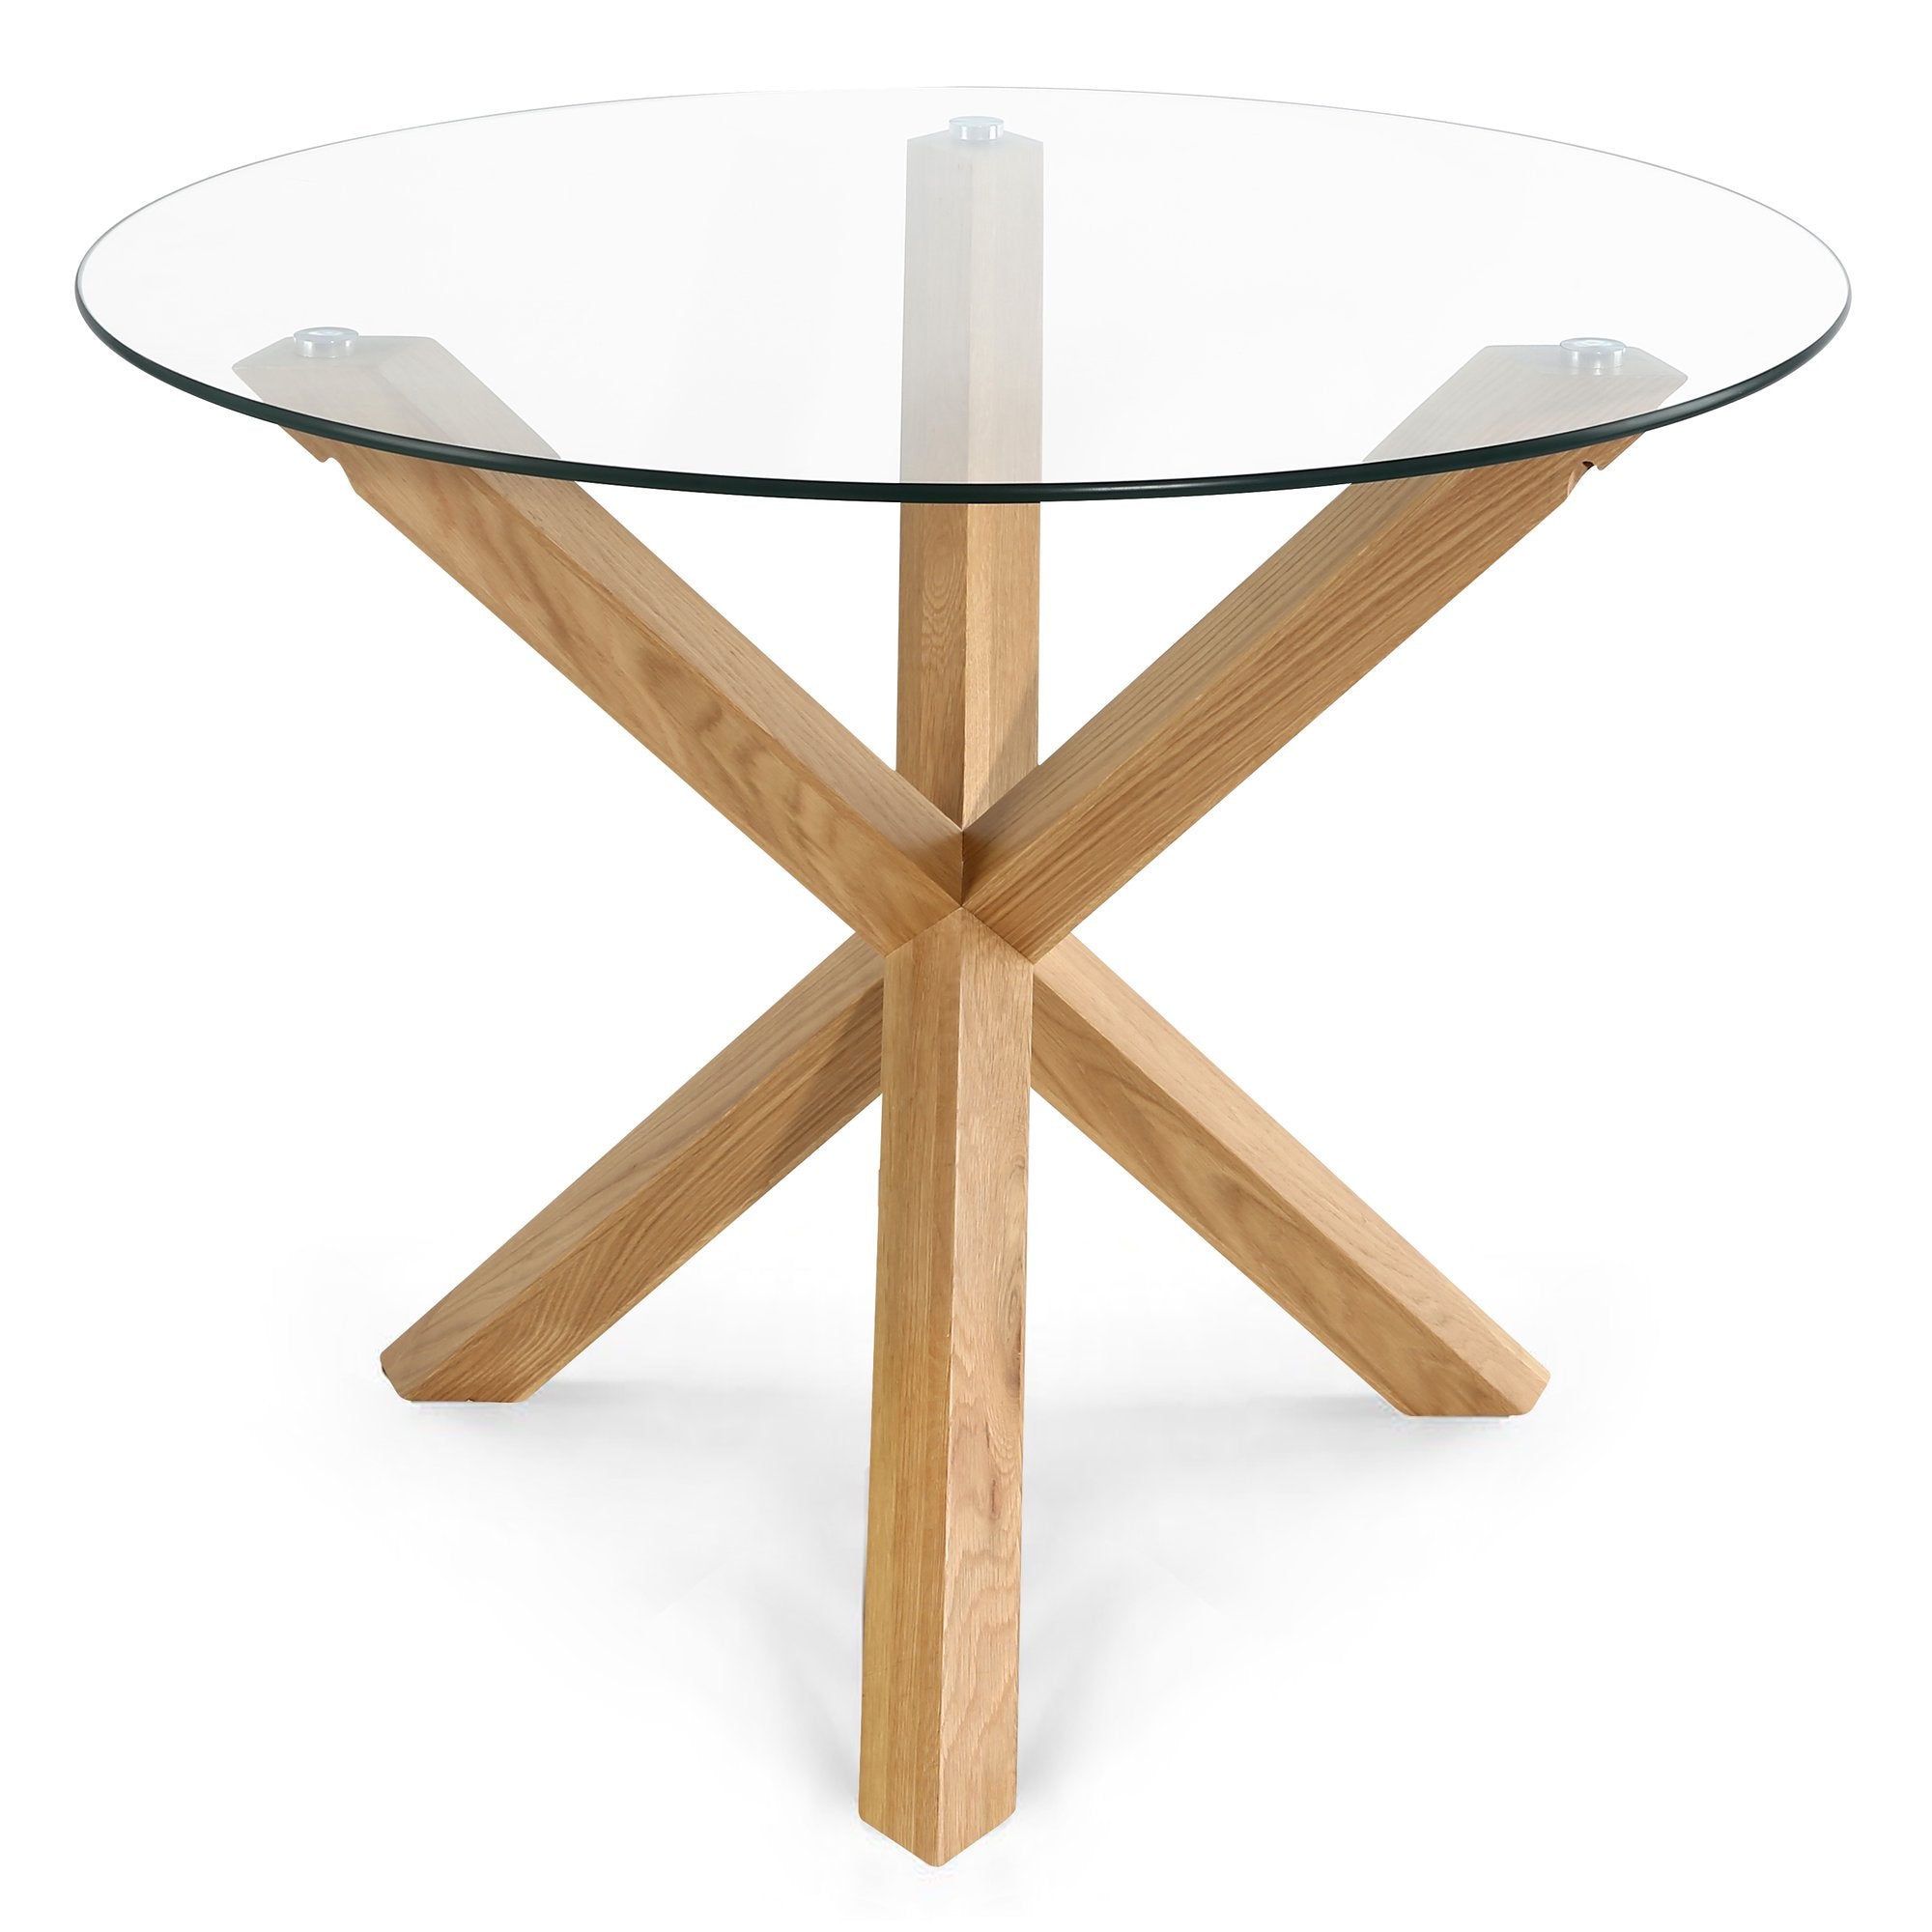 Kennedy 37.4" Round Dining Table EJ730